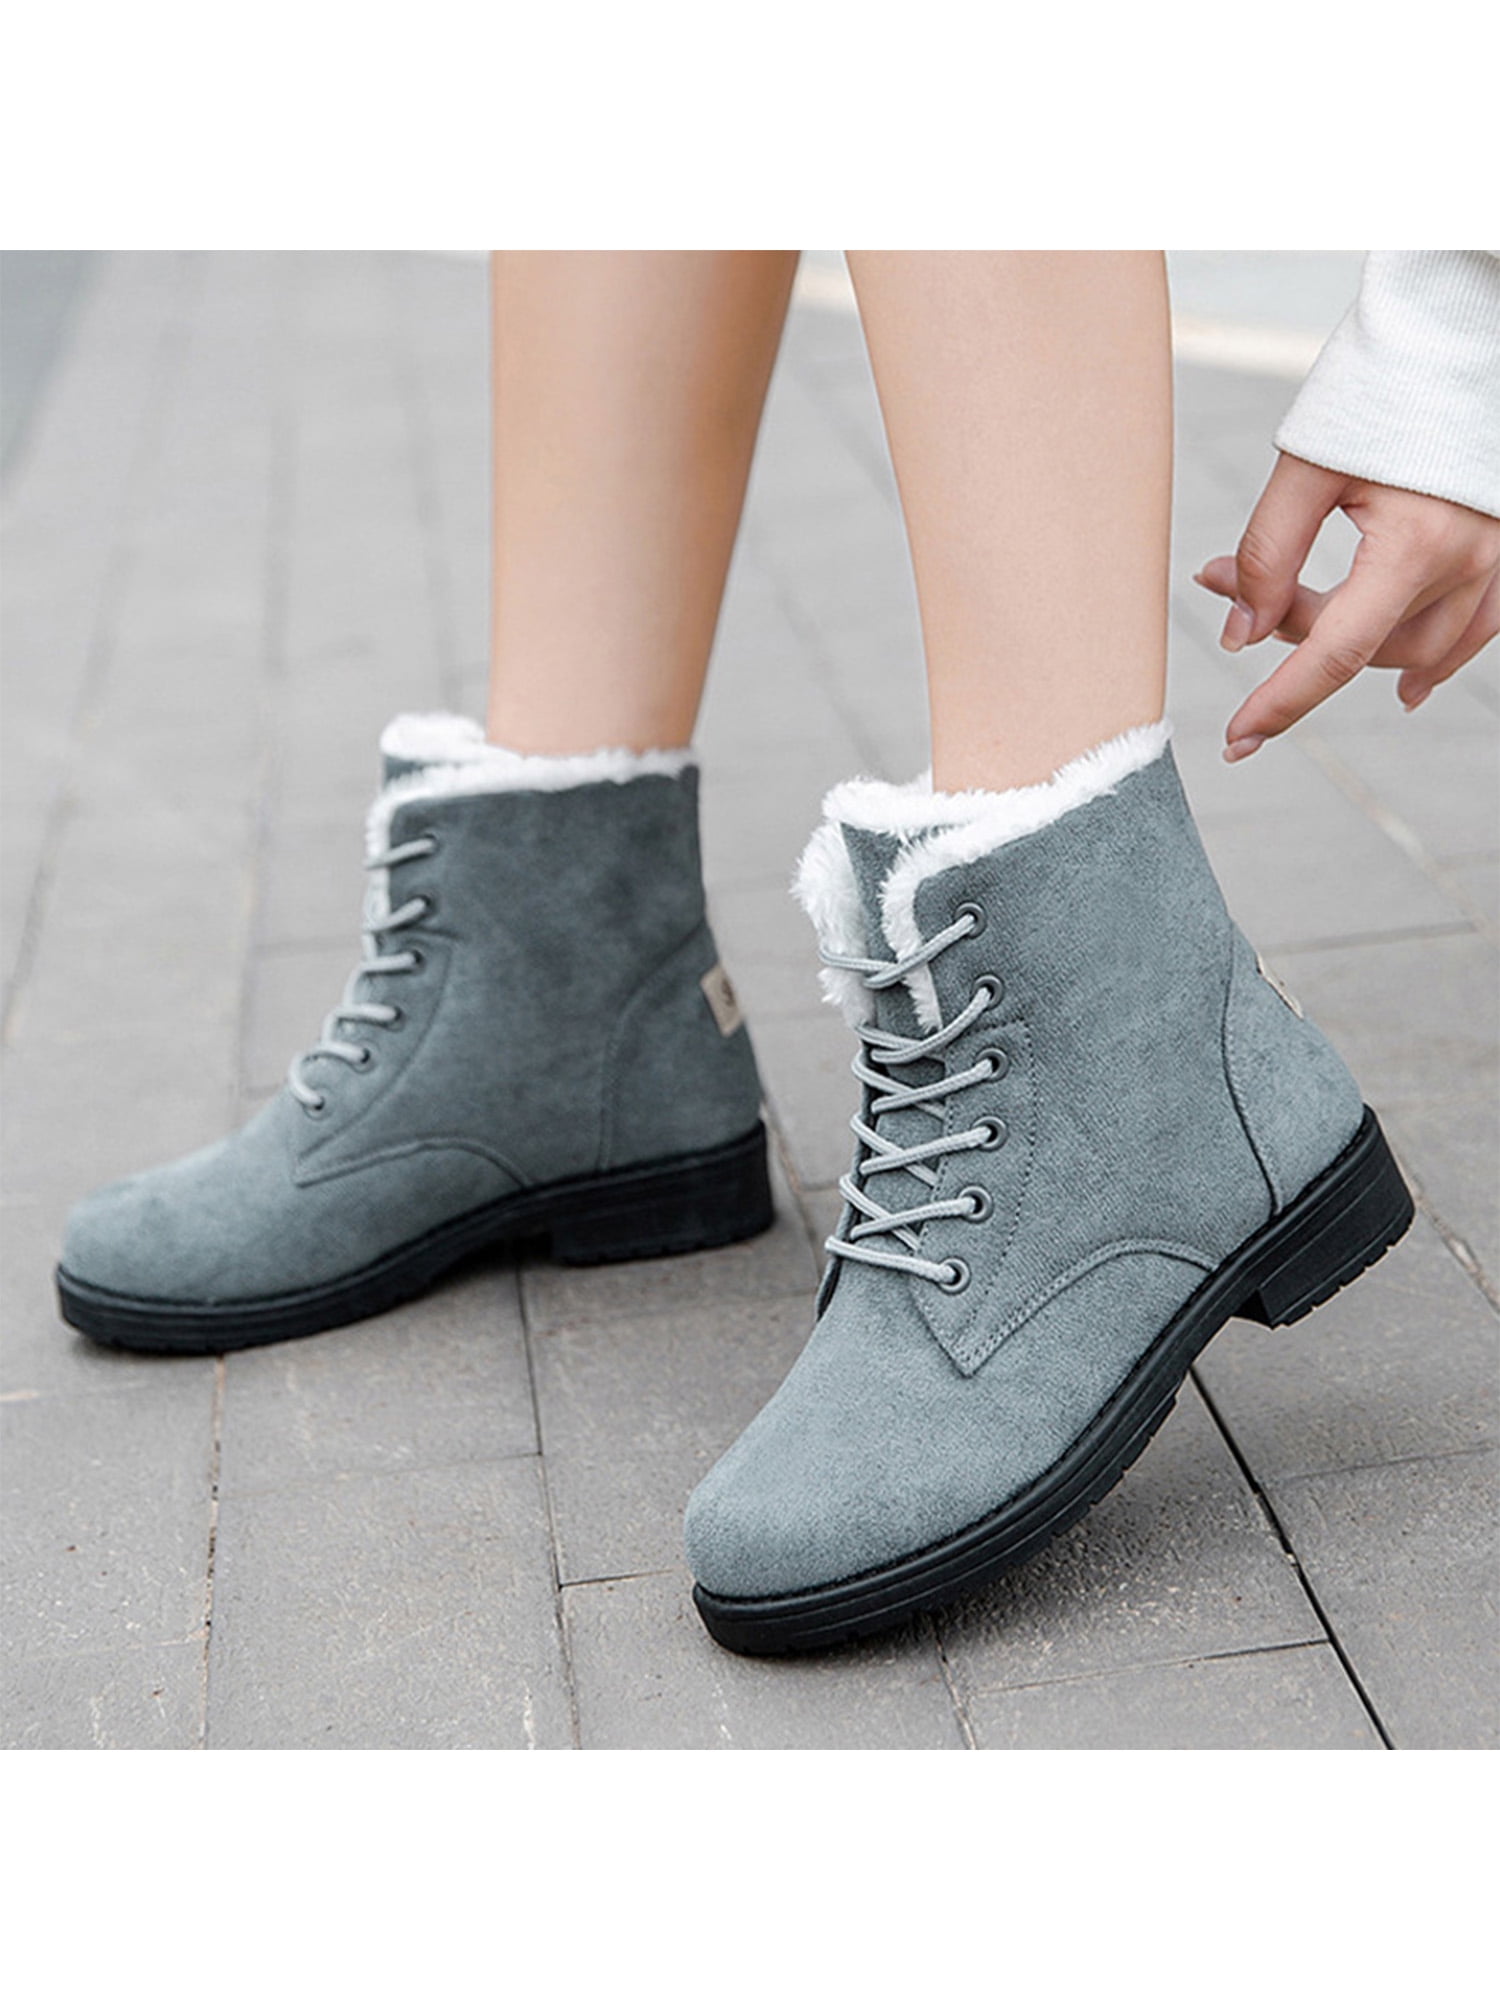 Ymiytan Women's Winter Warm Suede Lace Up Ankle Boots Snow Flat Casual ...